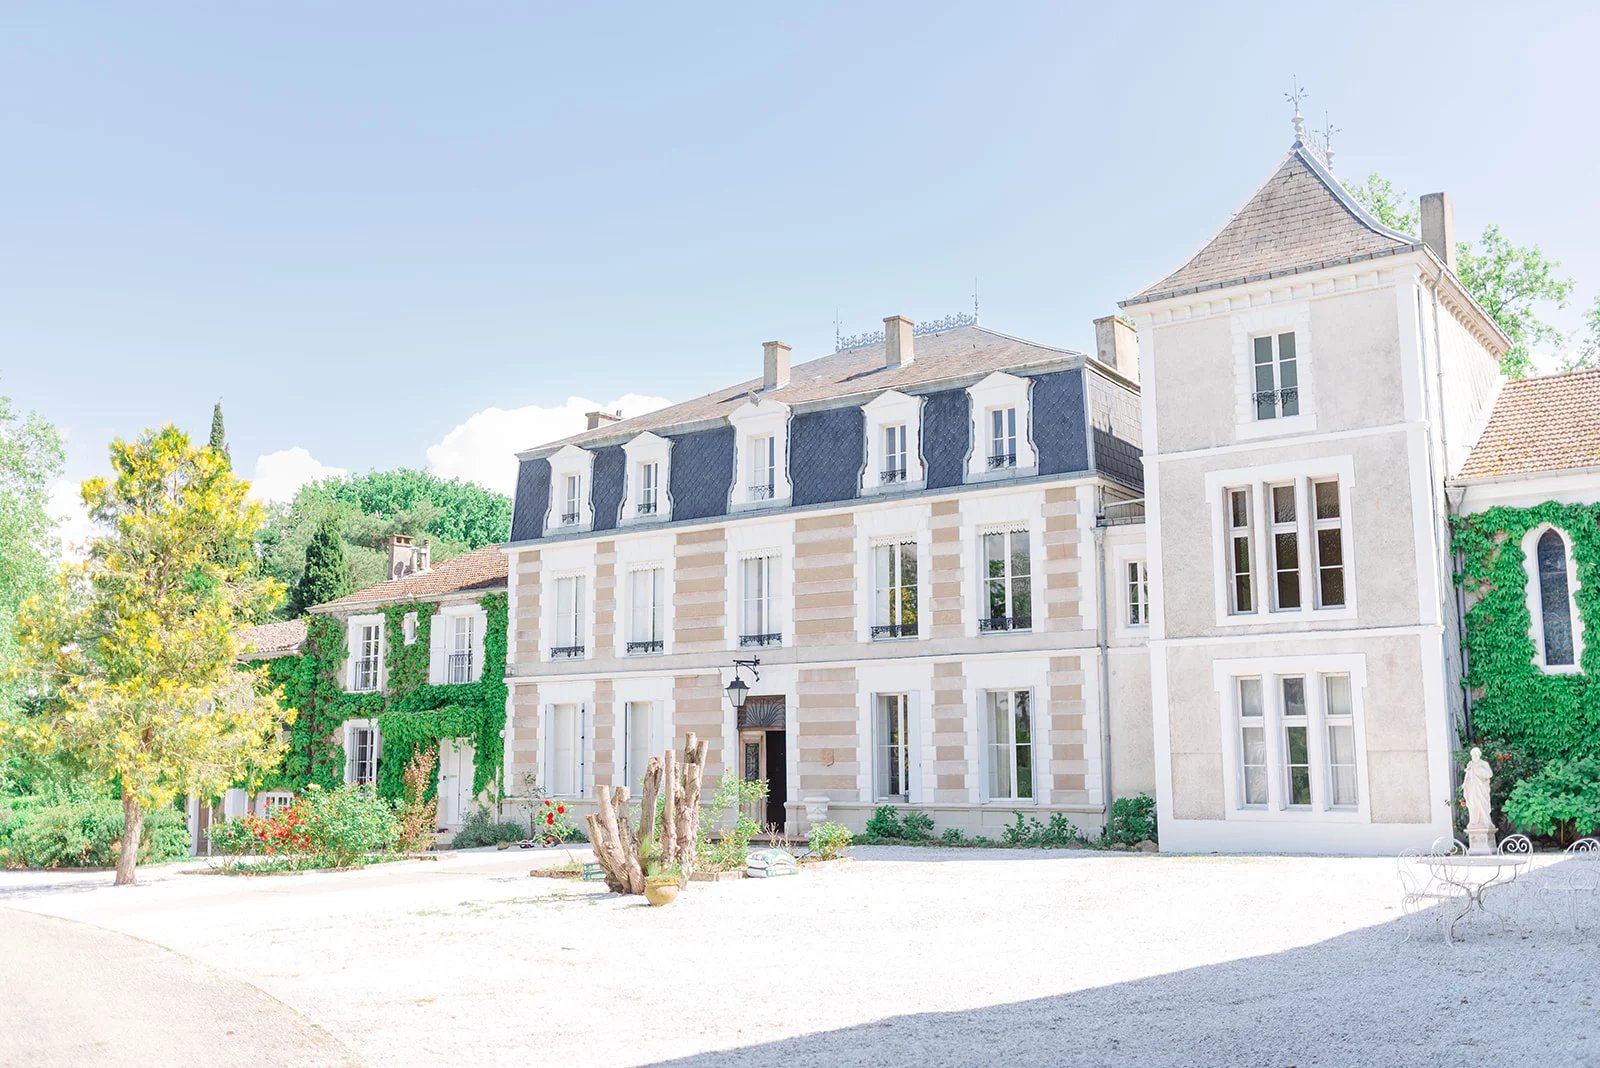 Stunningly renovated château set in a peaceful haven